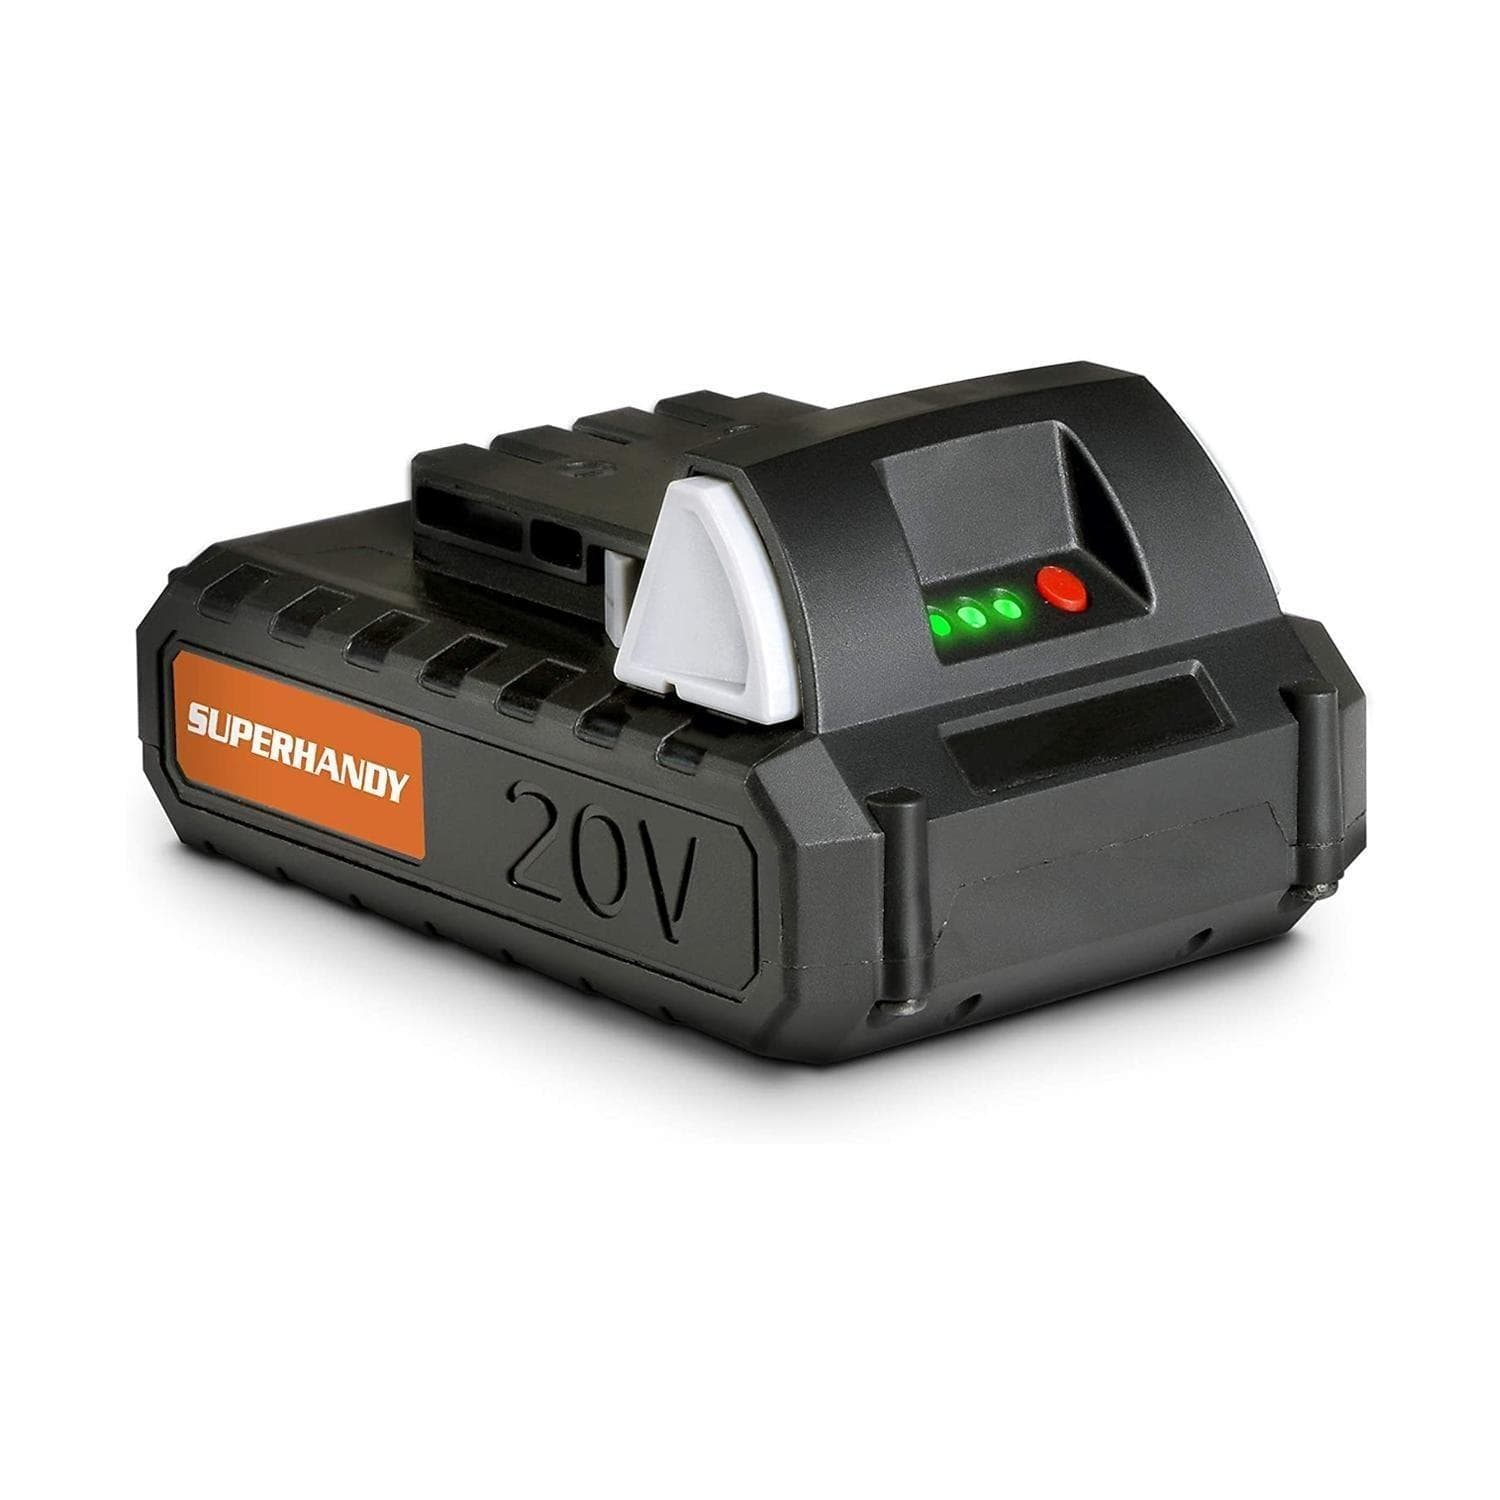 SuperHandy 3-in-1 Electric Garden Tool System - 20V 2Ah Battery